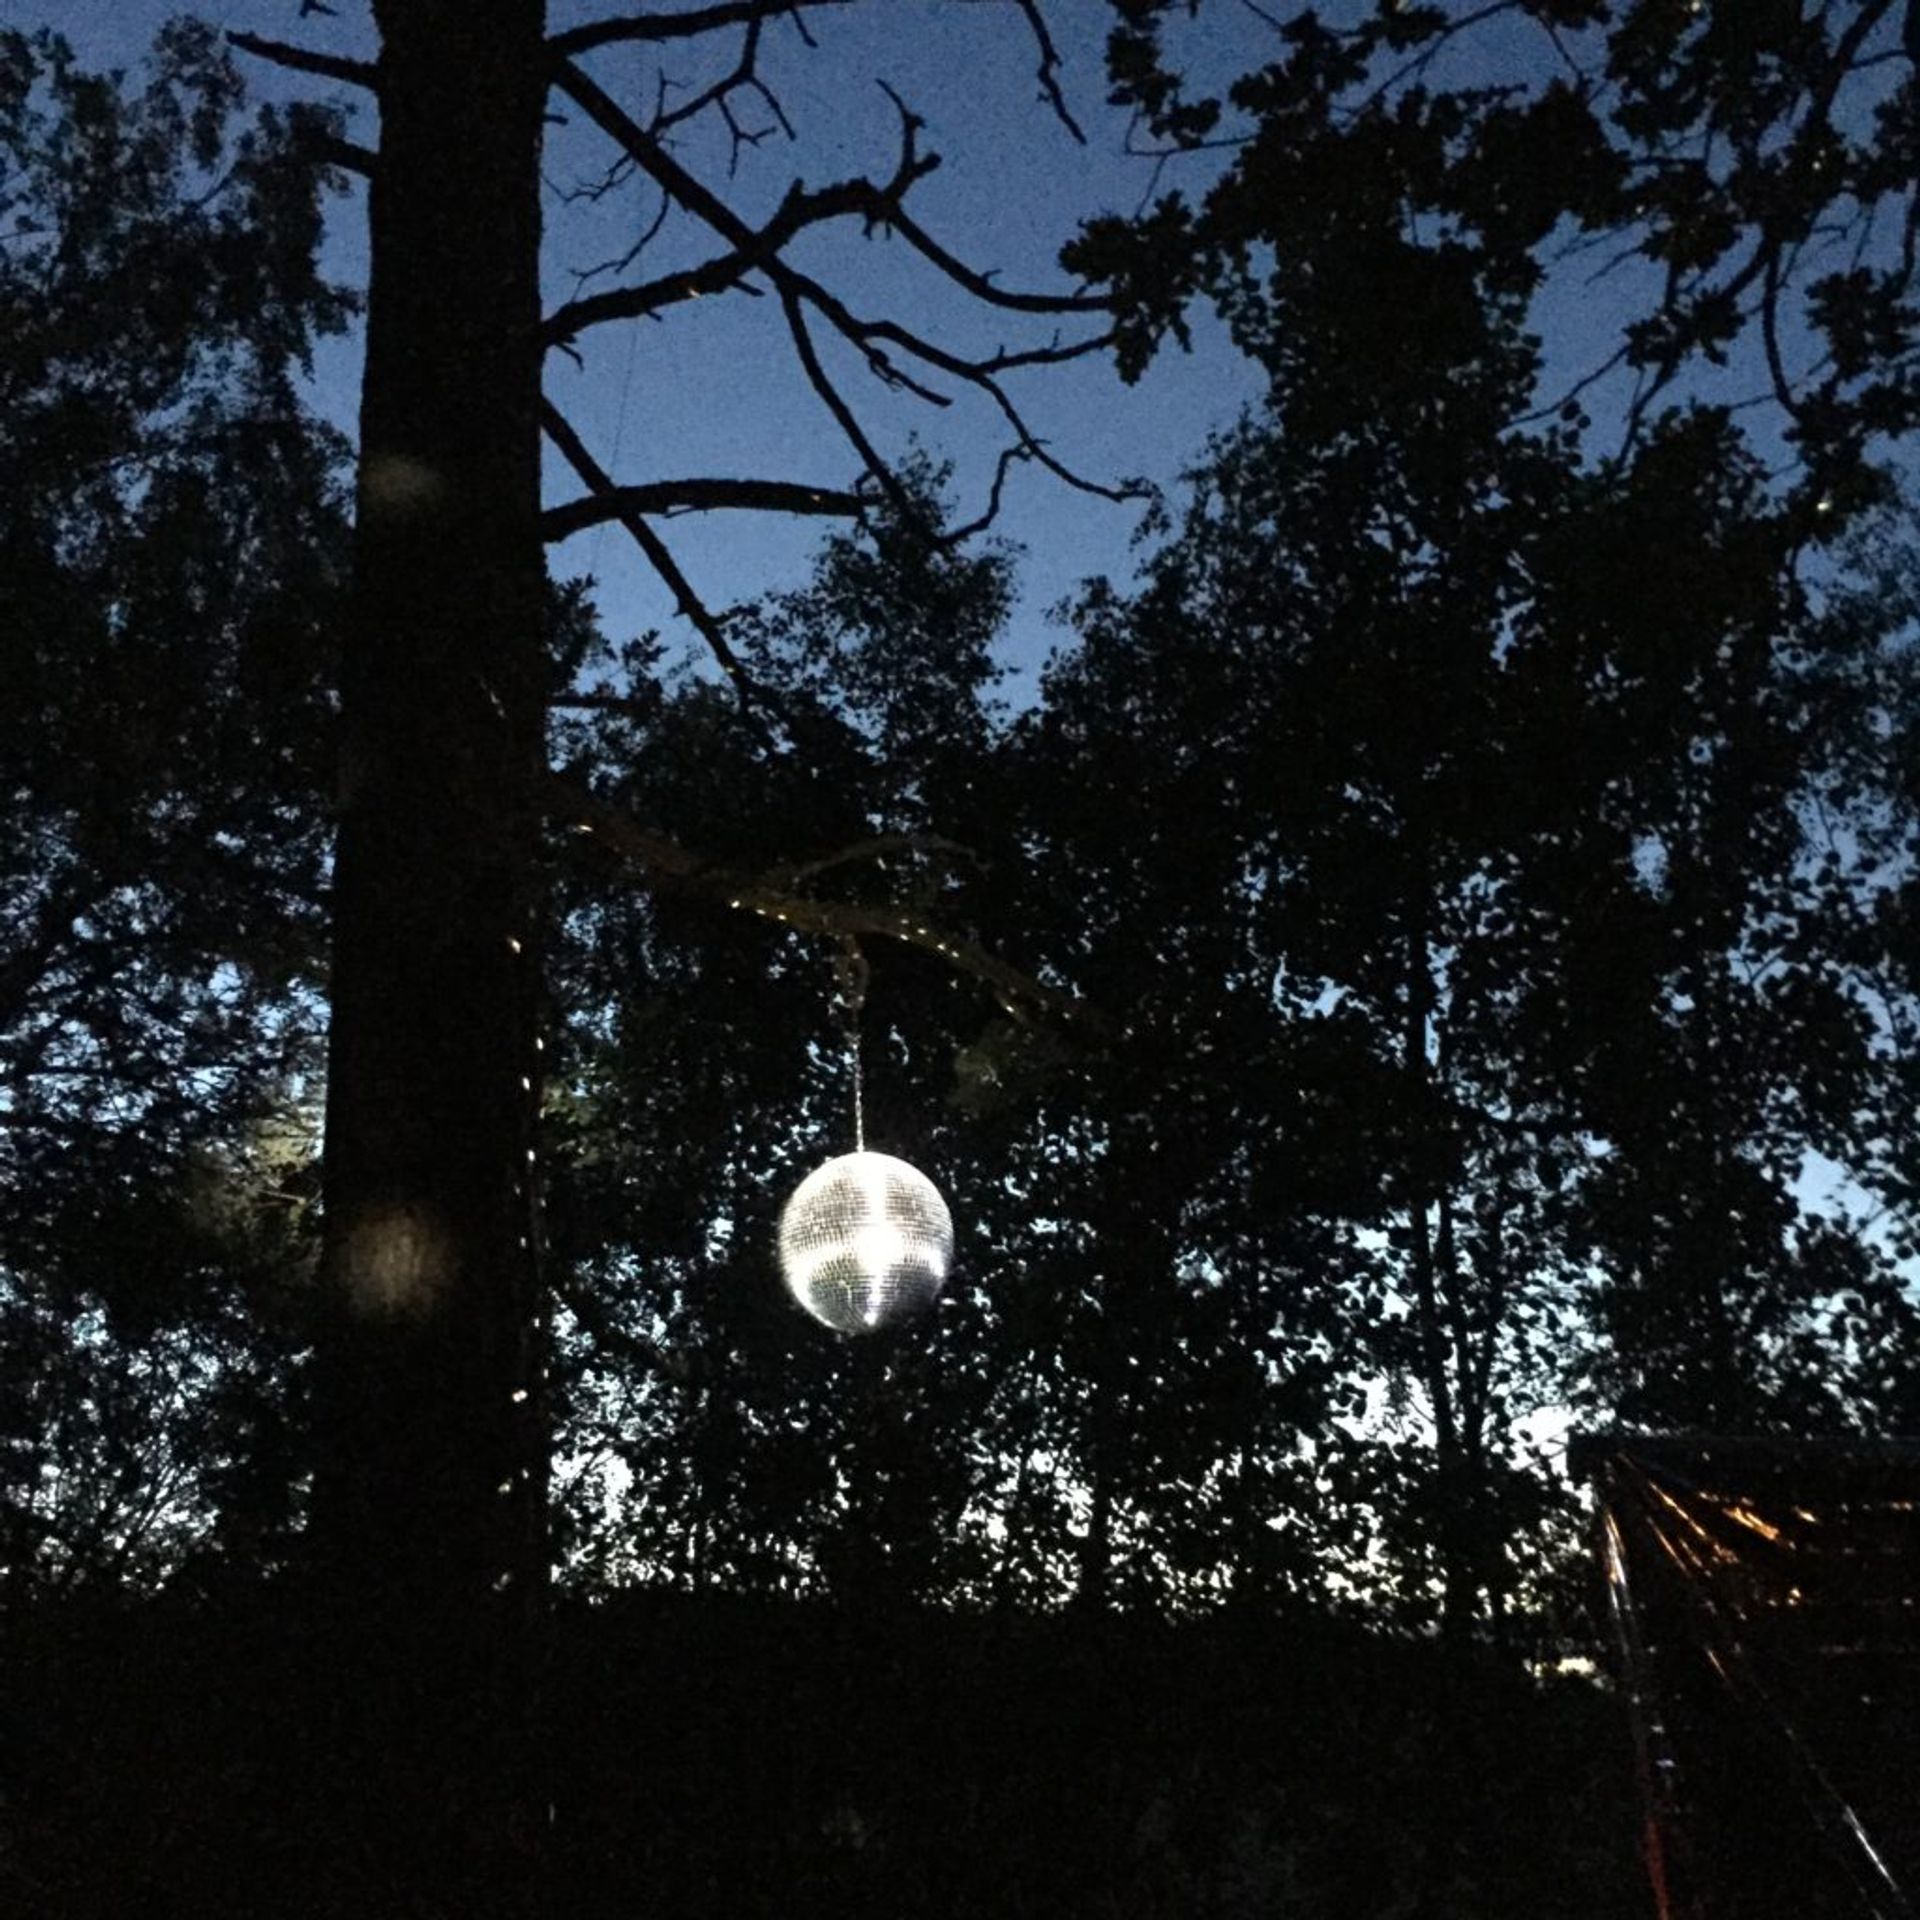 Disco ball in trees